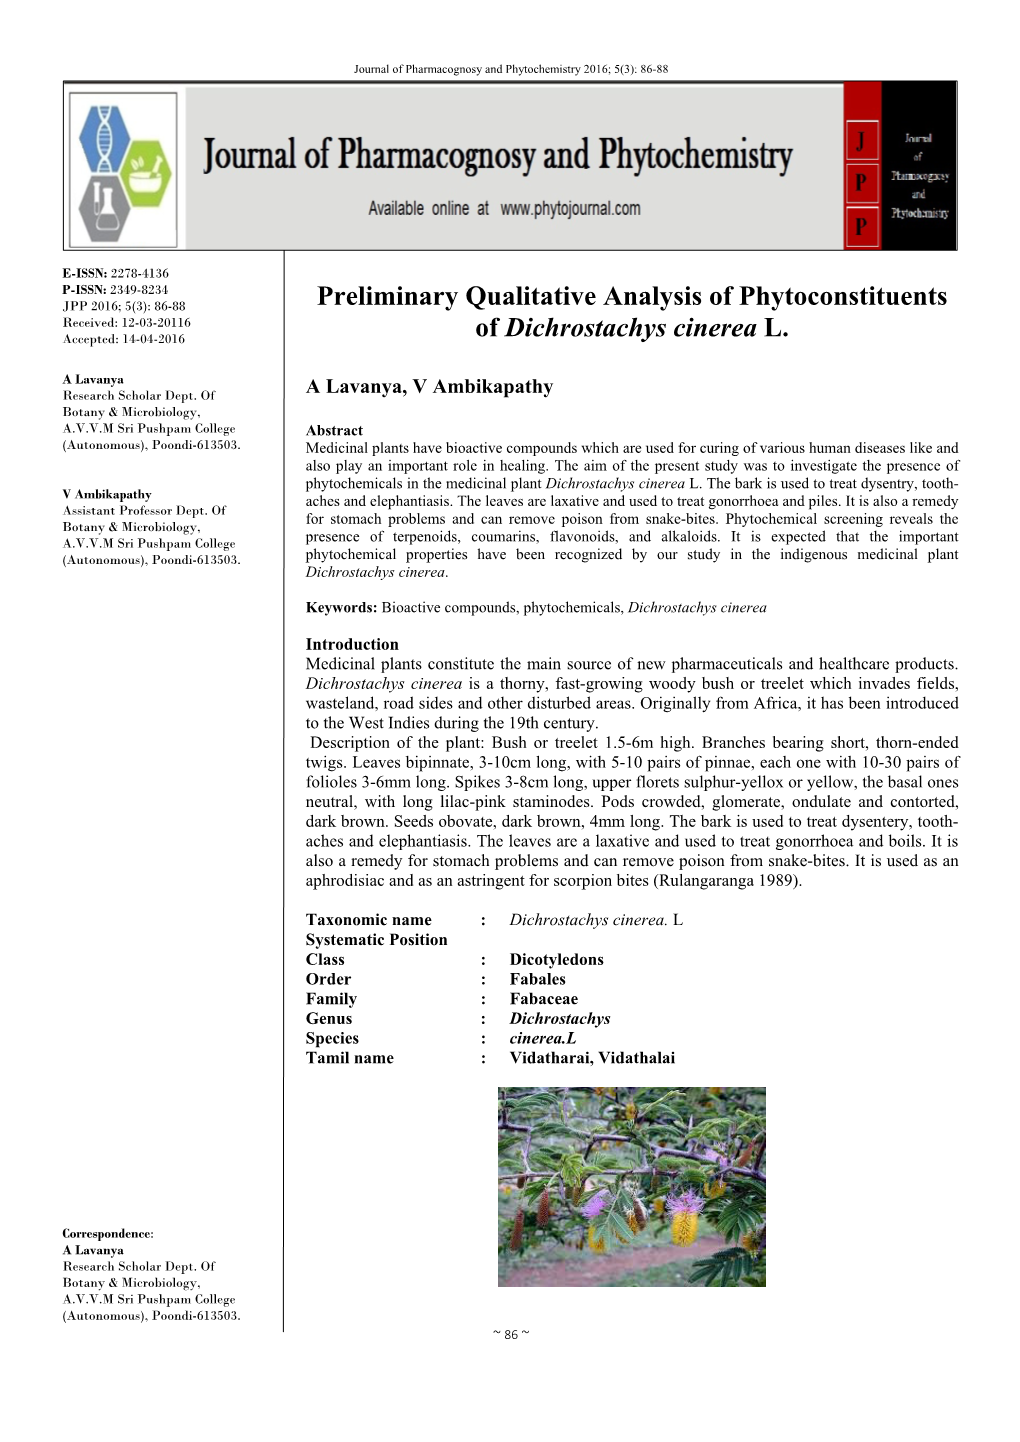 Preliminary Qualitative Analysis of Phytoconstituents of Dichrostachys Cinerea L